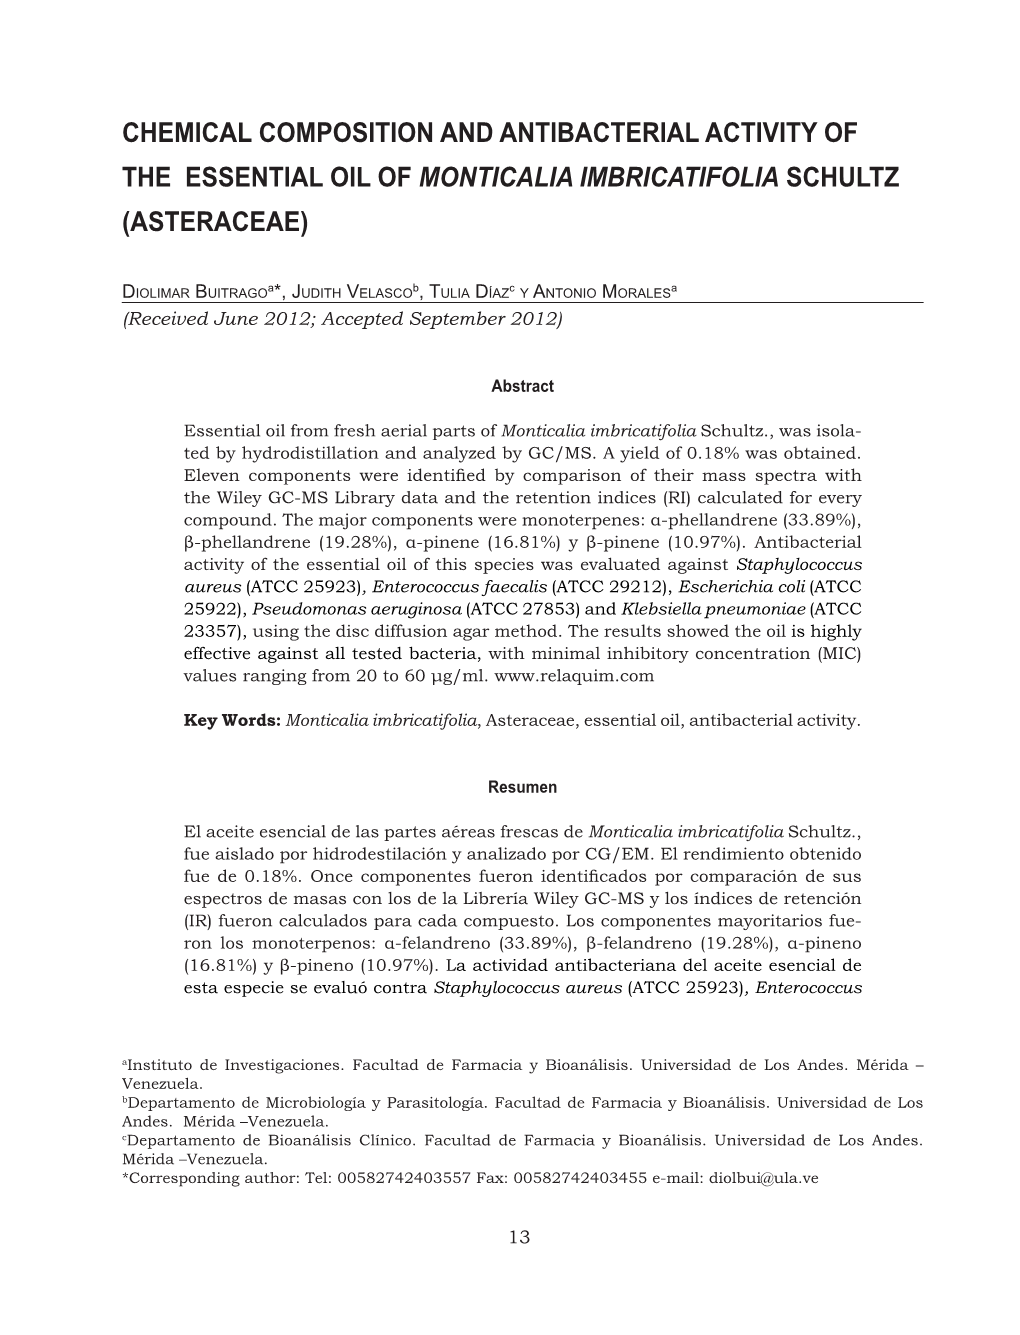 Chemical Composition and Antibacterial Activity of the Essential Oil of Monticalia Imbricatifolia Schultz (Asteraceae)